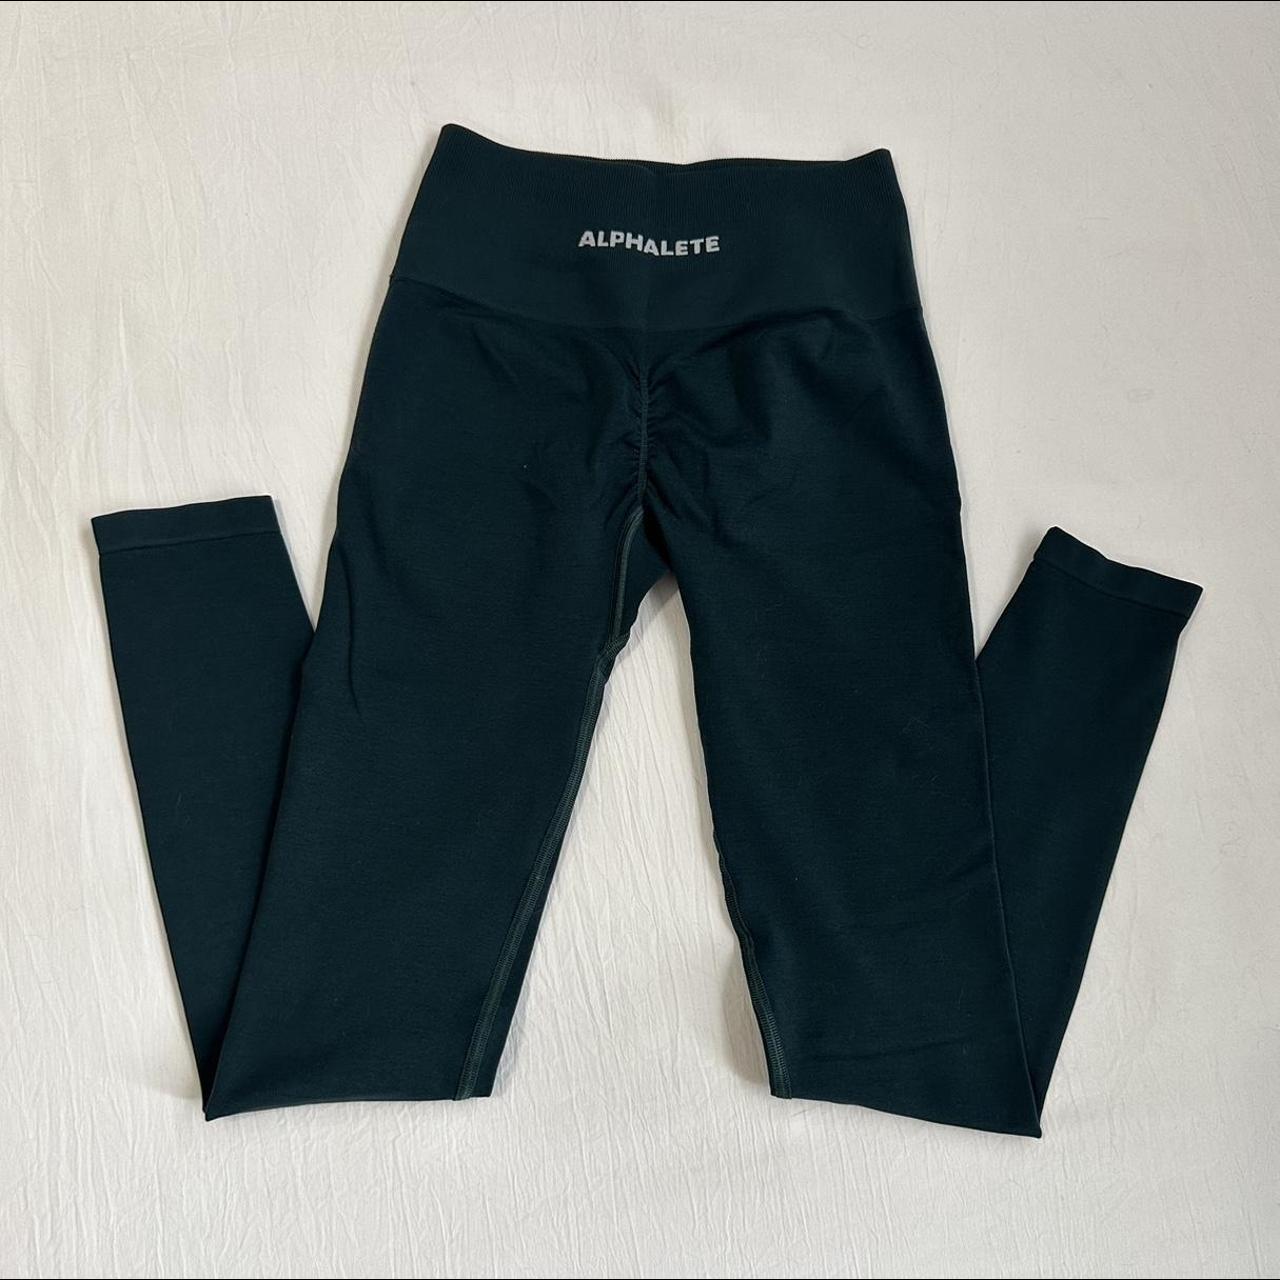 Alphalete amplify leggings size small in this - Depop